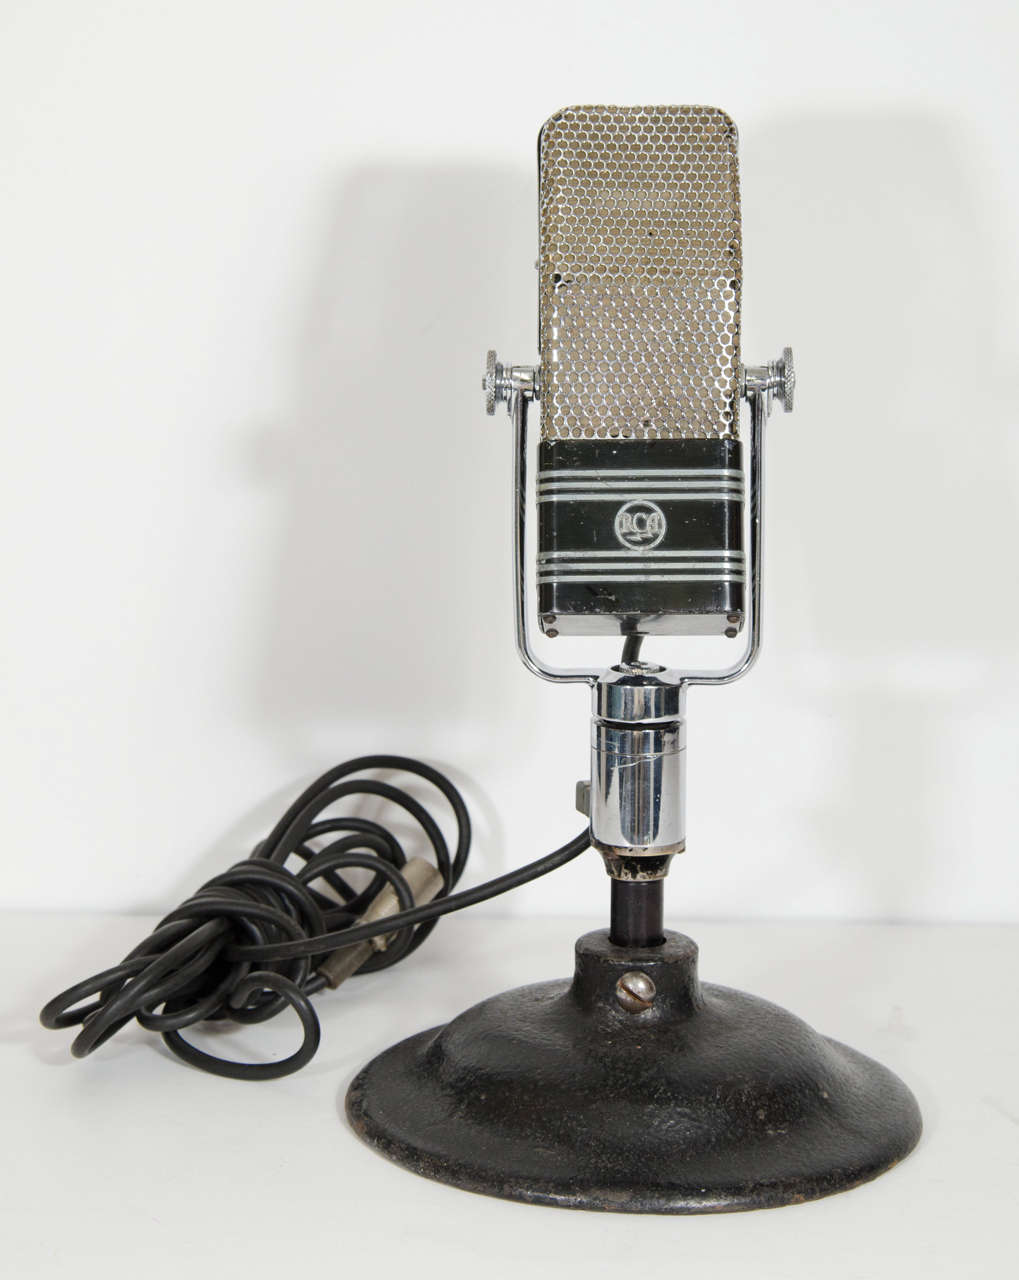 A vintage 44-BX RCA ribbon bi-directional velocity microphone designed for broadcast studio use. Good vintage condition with age appropriate wear and patina. The microphone is in working condition.